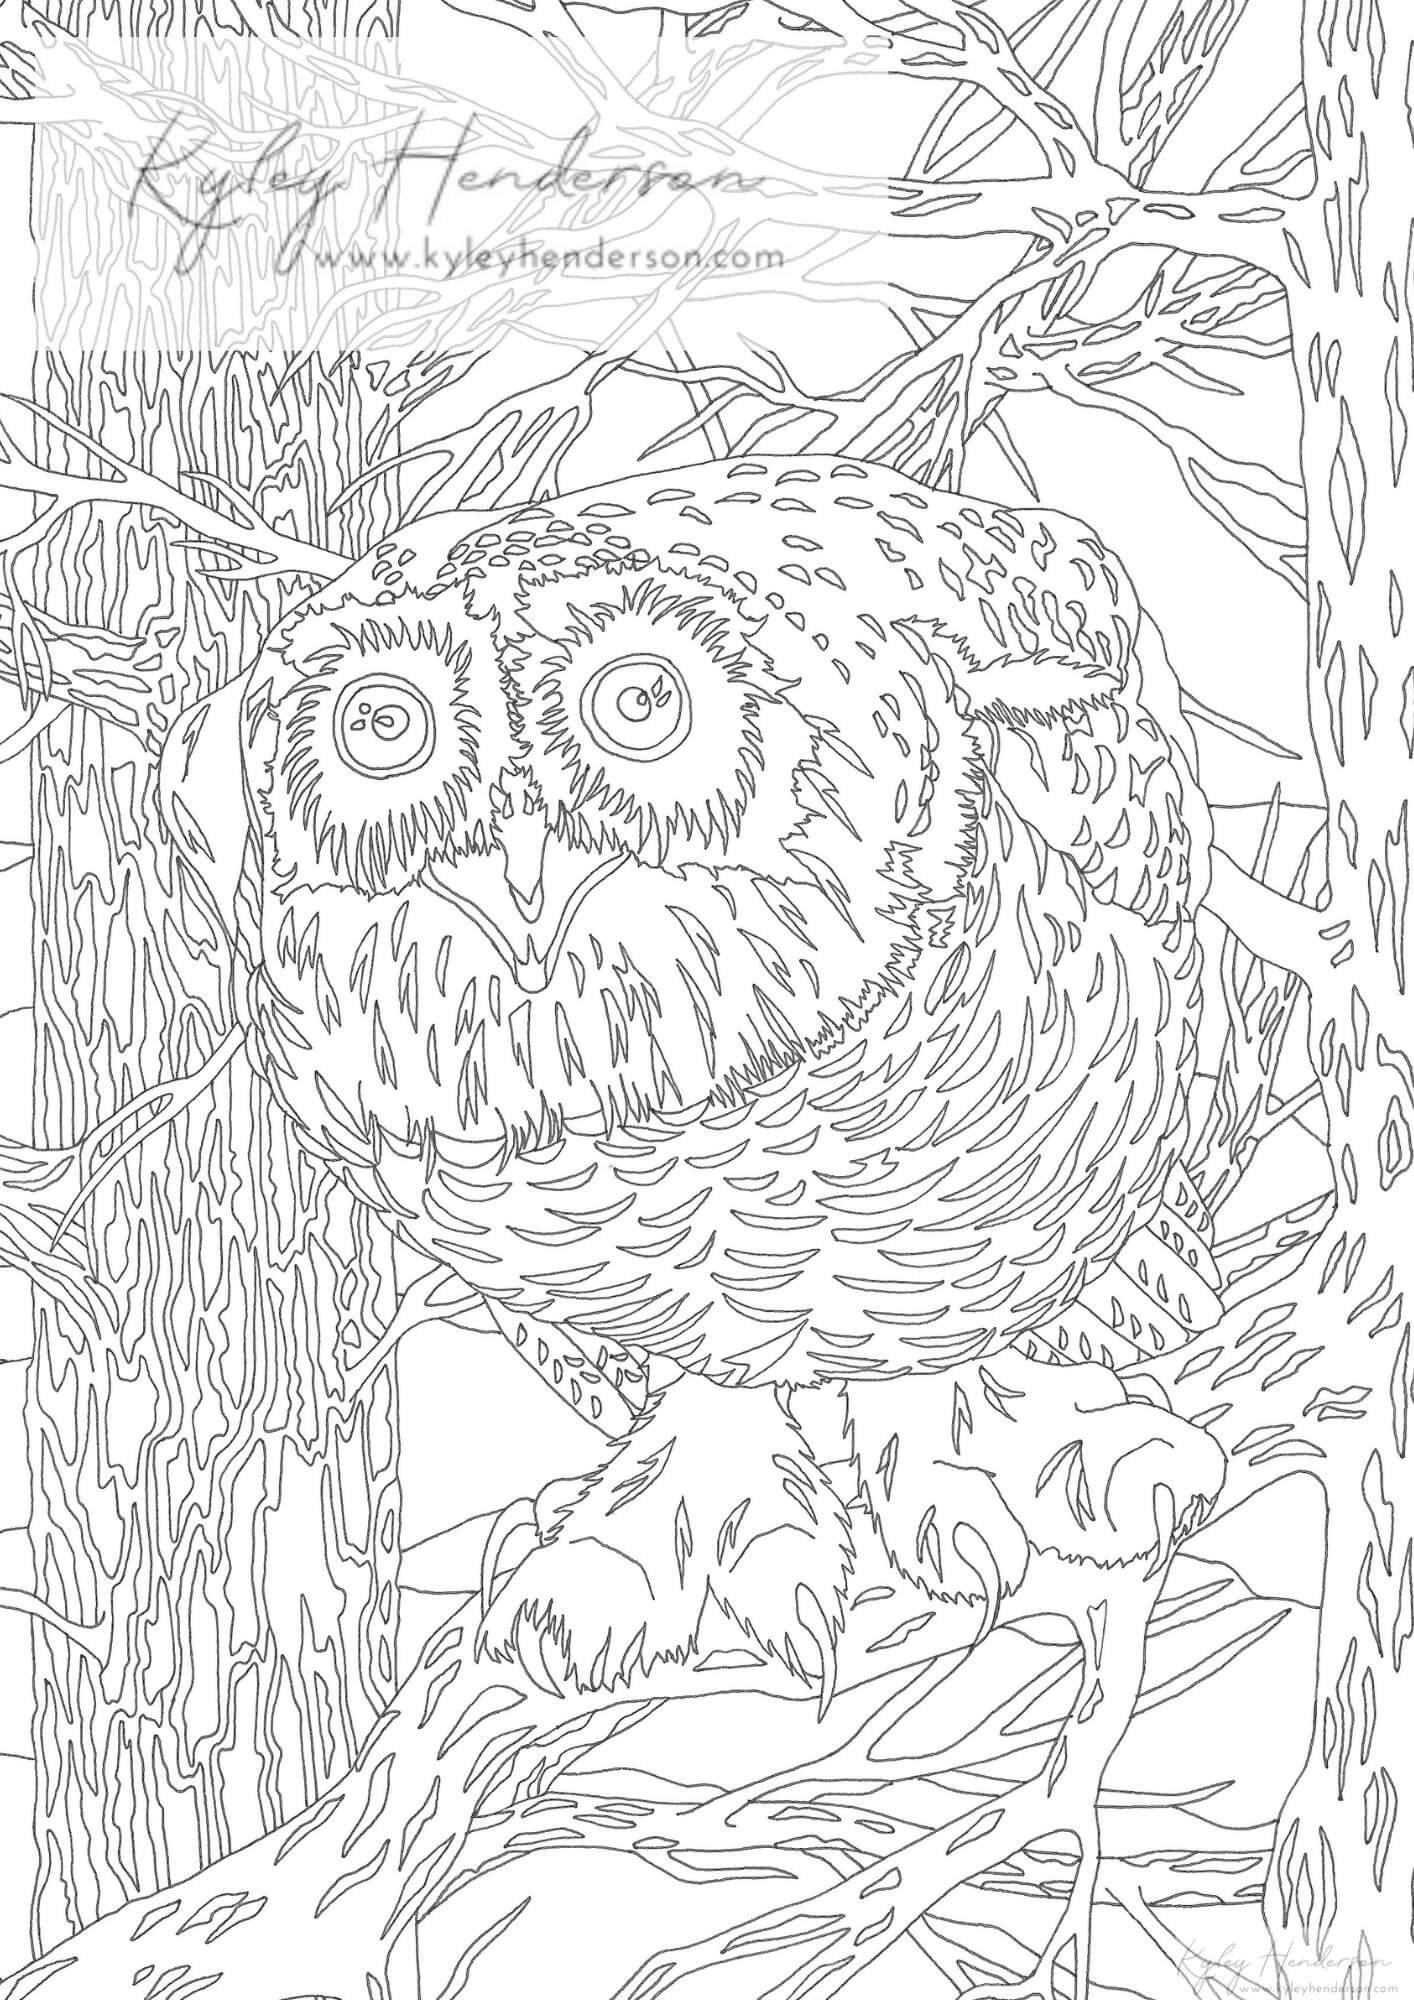 Snowy owl adult coloring pages owl coloring page digital instant download coloring sheet of an owl â kyley henderson art